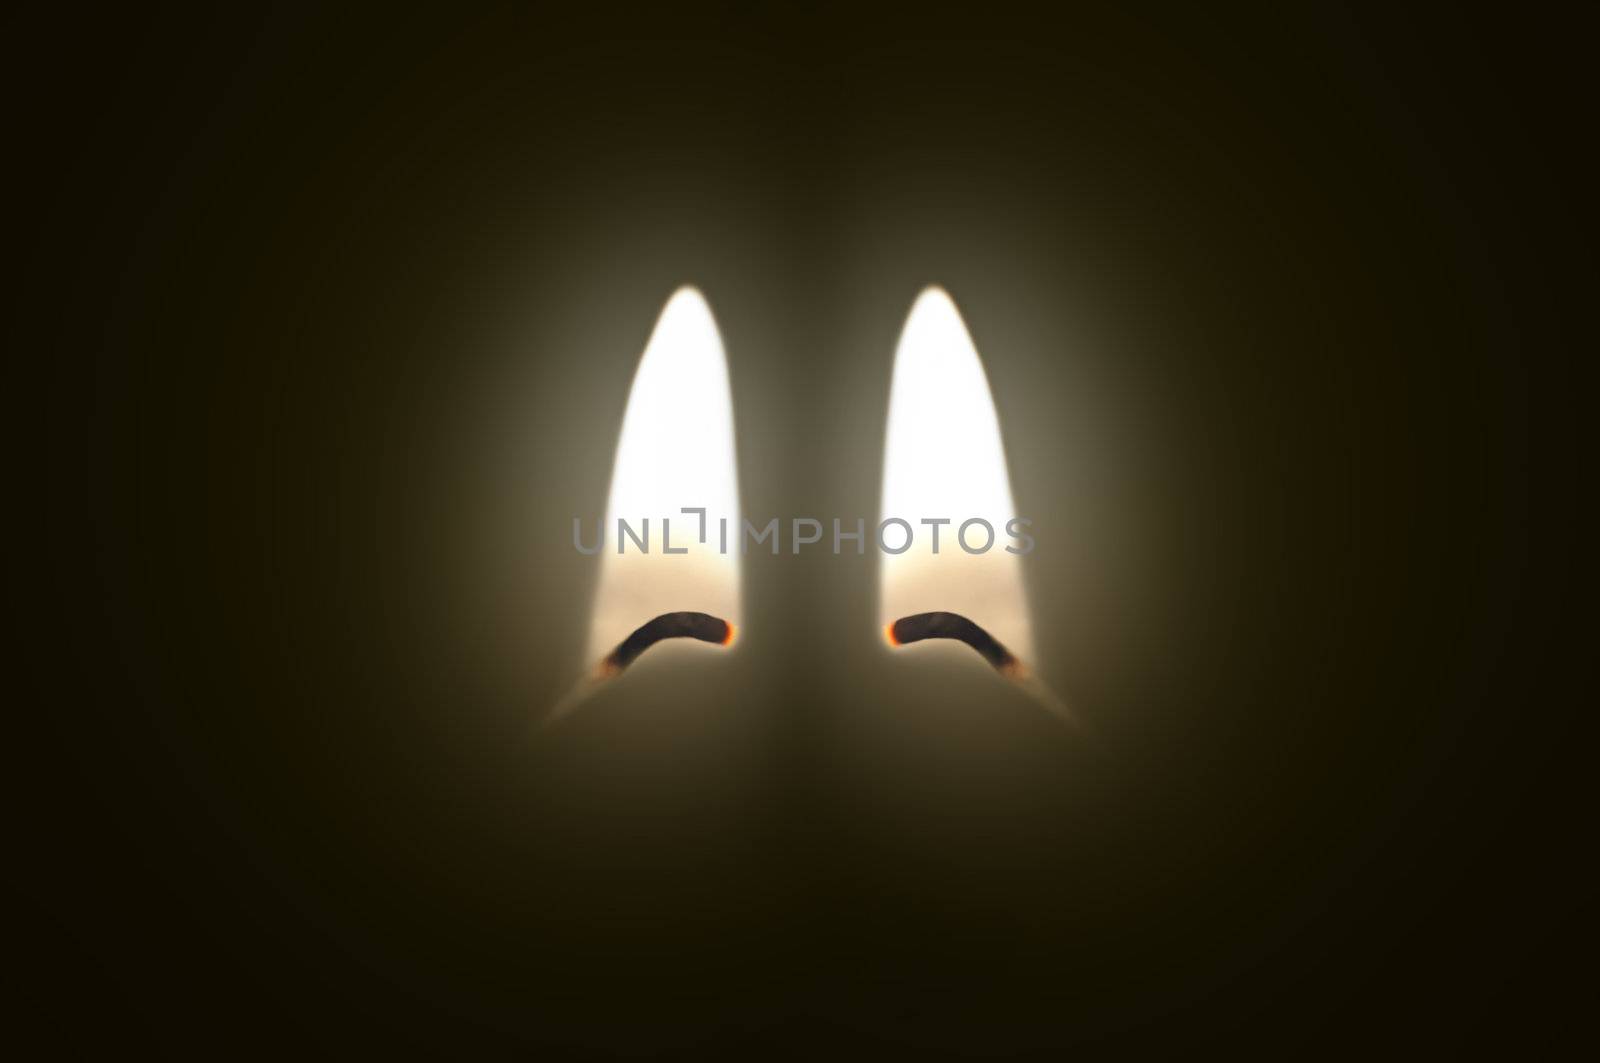 Close up on two ignited candle wicks against a black background.